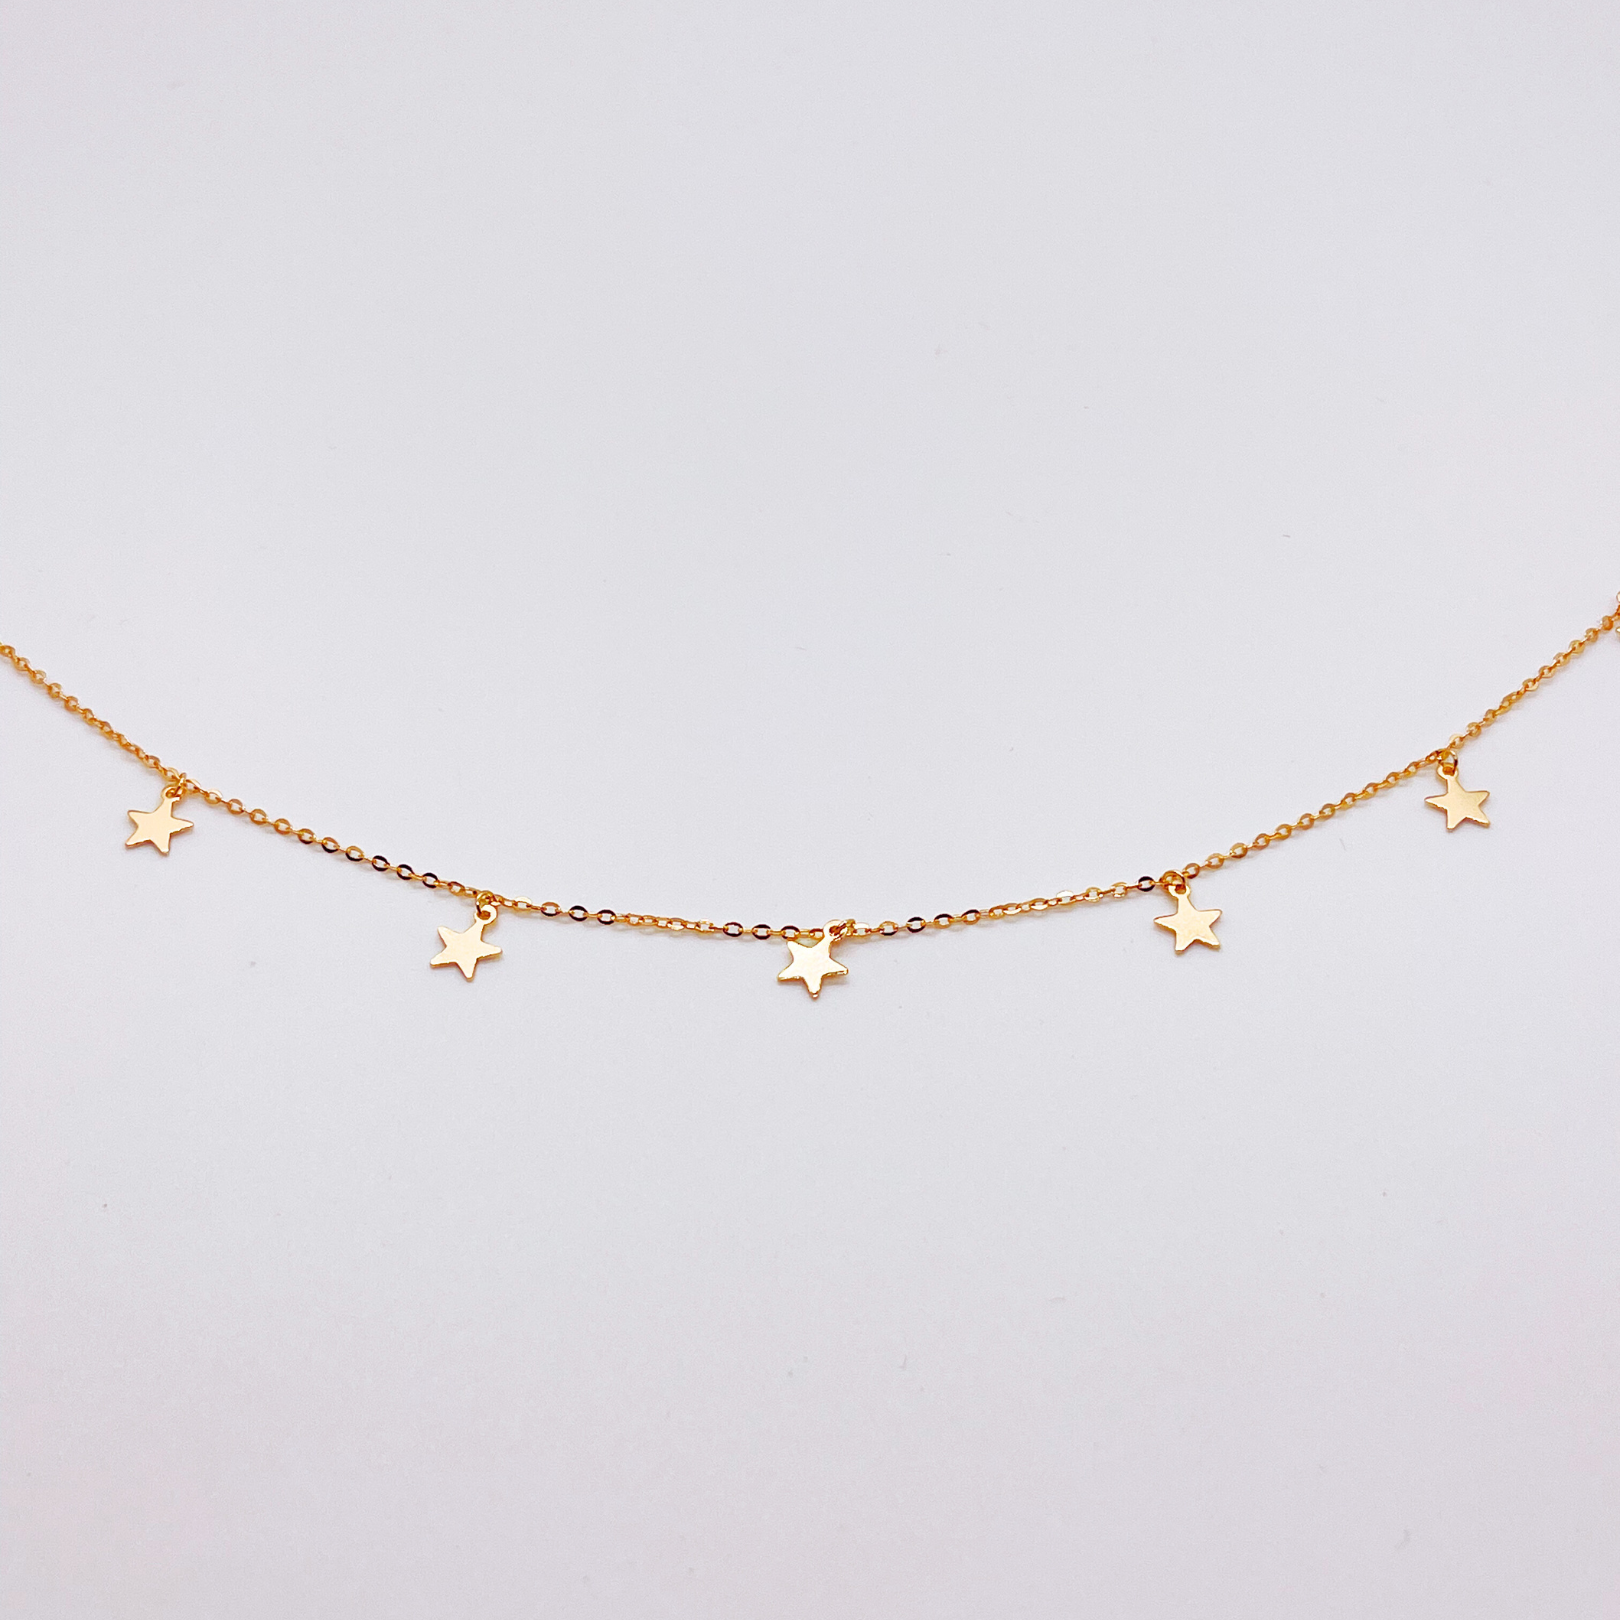 Gold anklet with star charms on a white background